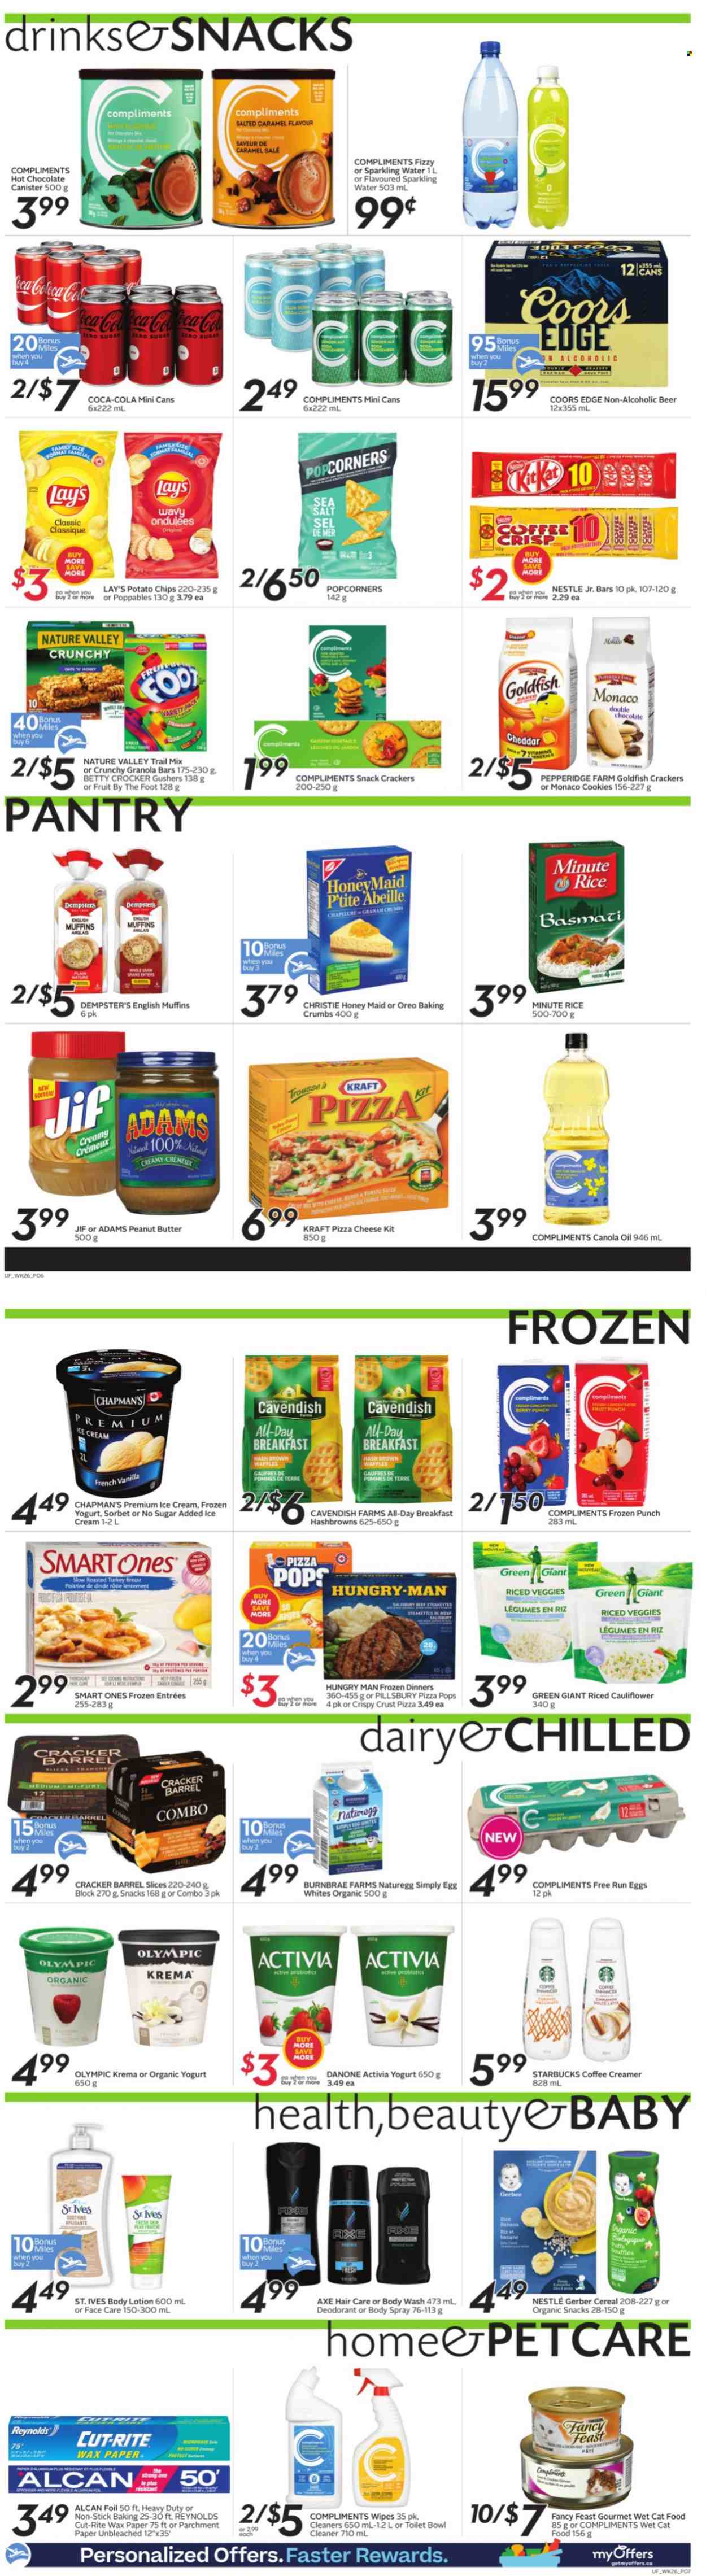 thumbnail - Sobeys Urban Fresh Flyer - October 21, 2021 - October 27, 2021 - Sales products - english muffins, waffles, pizza, Pillsbury, Kraft®, yoghurt, organic yoghurt, Activia, eggs, creamer, ice cream, hash browns, cookies, snack, crackers, Ego, Gerber, potato chips, Lay’s, popcorn, Goldfish, cereals, granola bar, Honey Maid, Nature Valley, basmati rice, canola oil, oil, peanut butter, Jif, trail mix, Coca-Cola, sparkling water, hot chocolate, organic coffee, Starbucks, punch, beer, turkey, wipes, cleaner, body wash, body lotion, body spray, anti-perspirant, animal food, cat food, Fancy Feast, wet cat food, probiotics, Oreo, Danone, Nestlé, Coors, deodorant. Page 5.